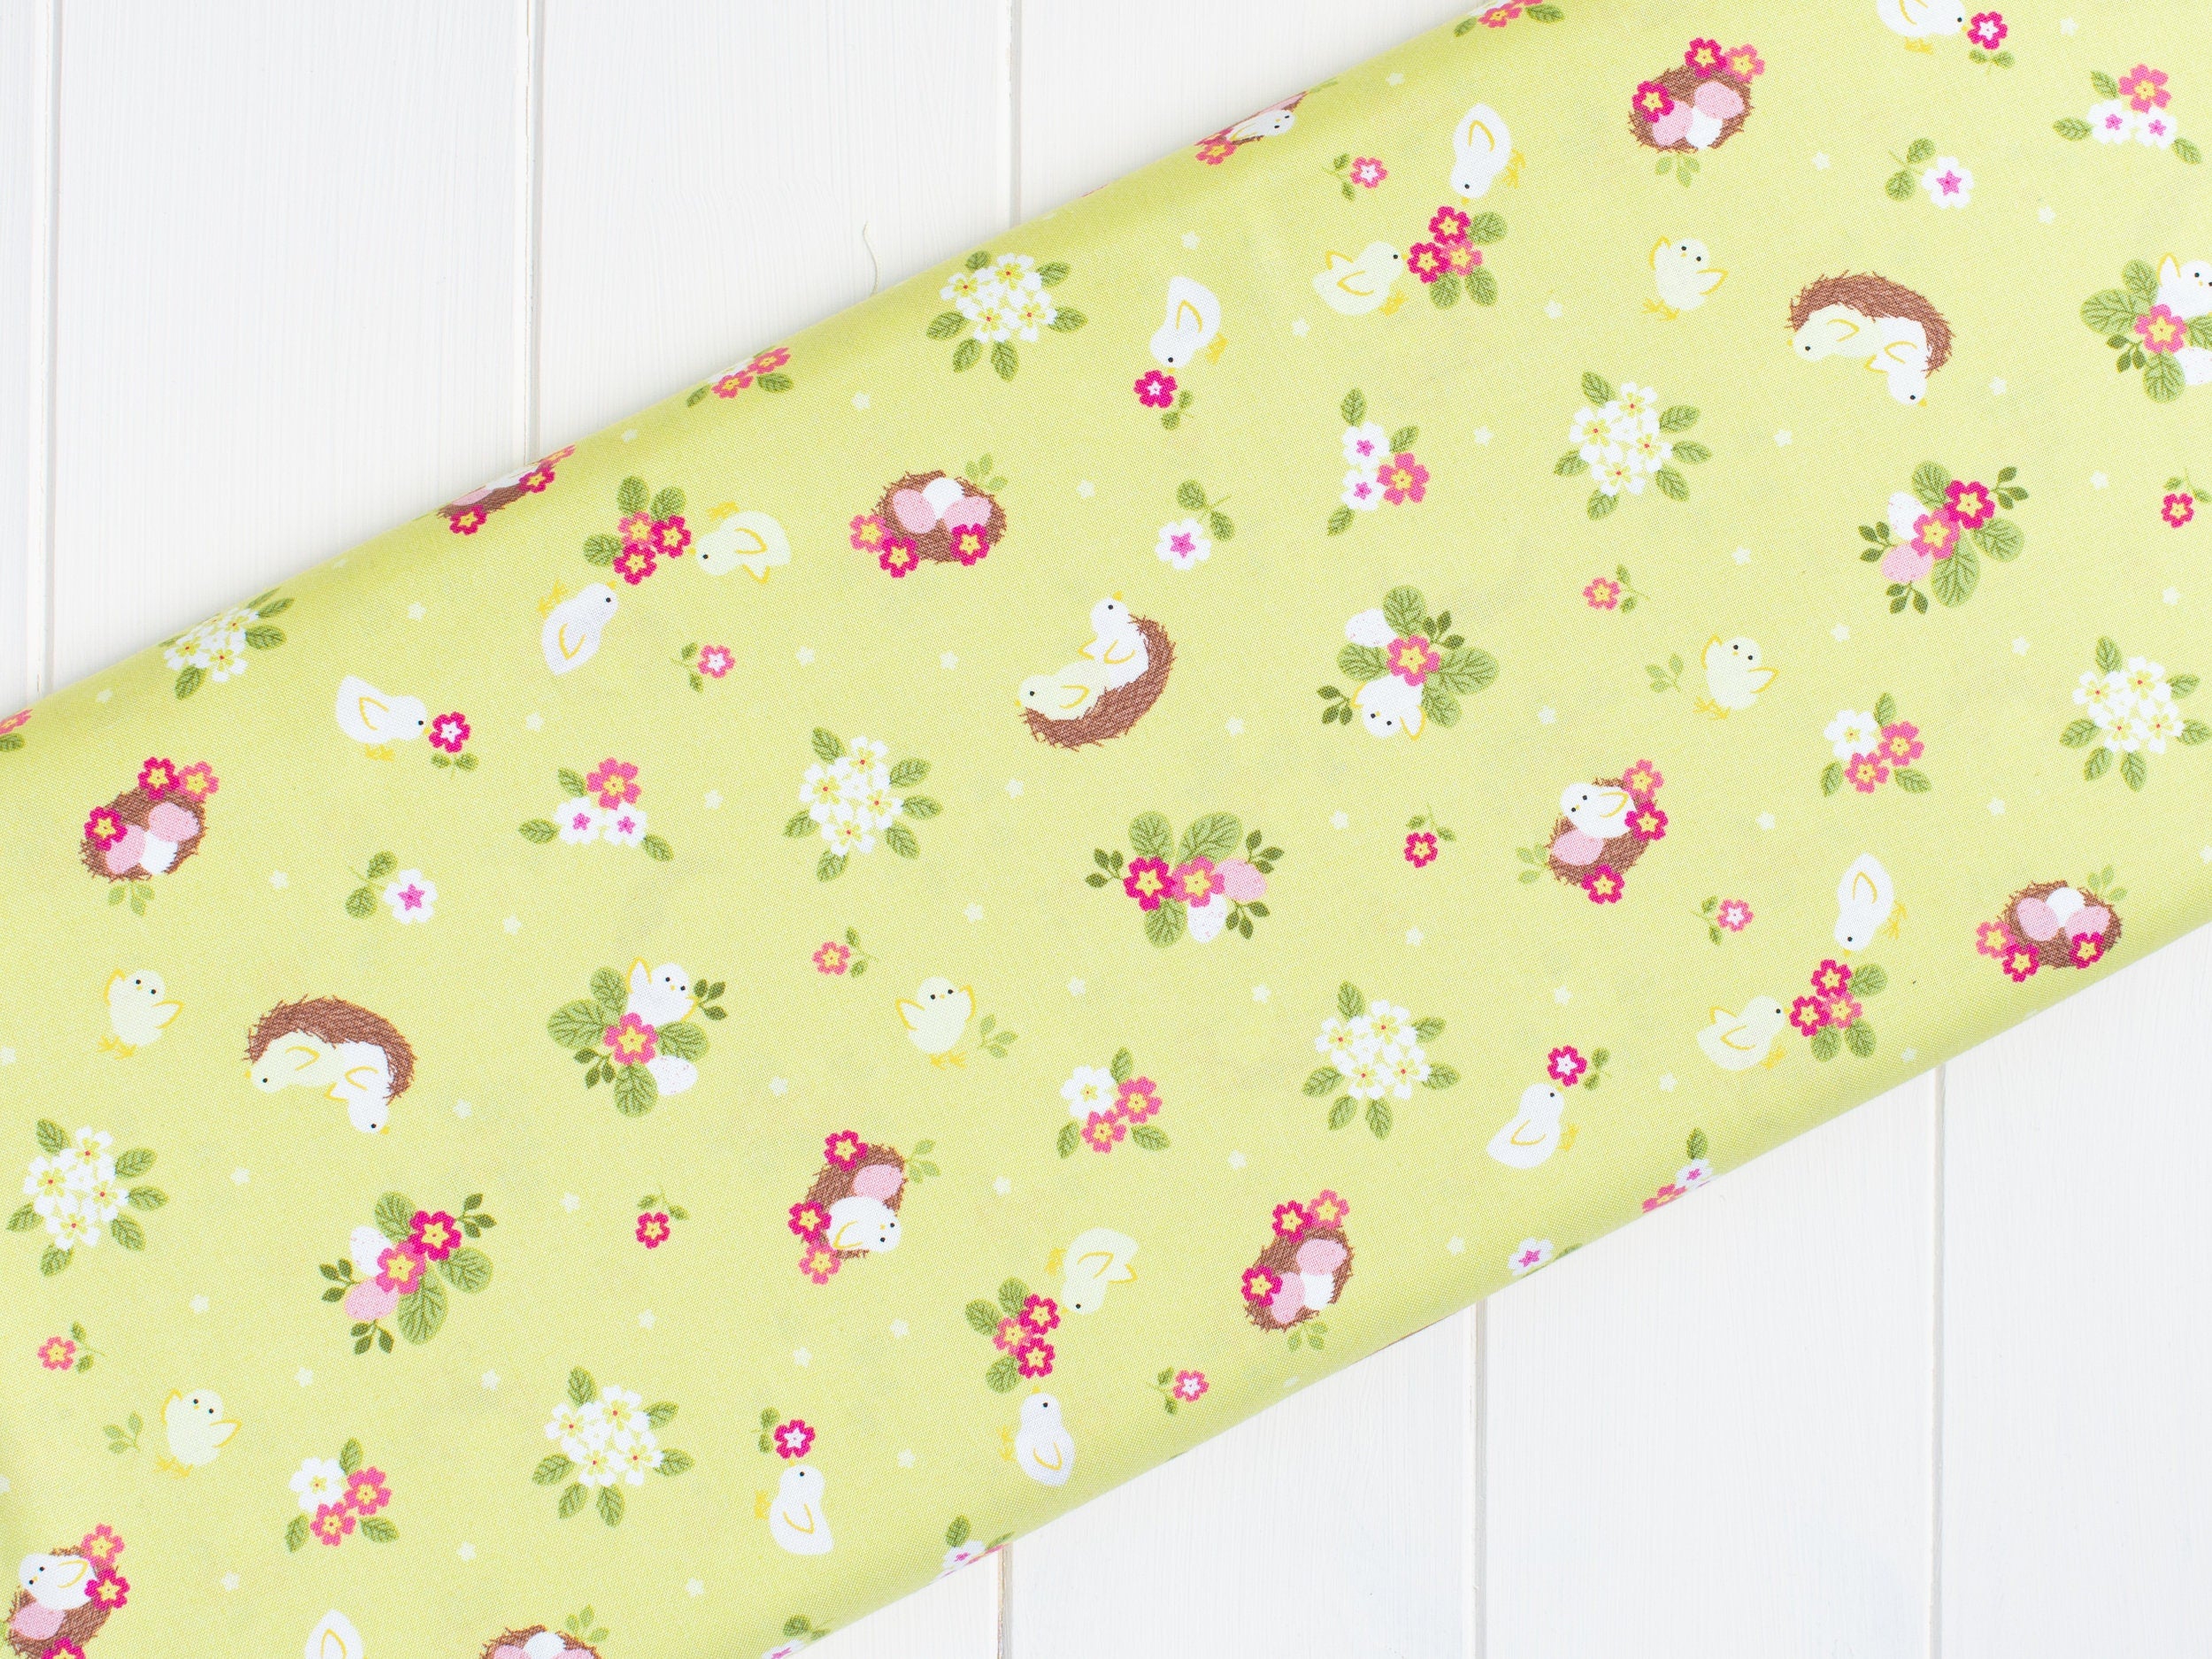 Chicks Nests Eggs and Floral Yellow quilting cotton fabric - Bunny Hop by Lewis & Irene